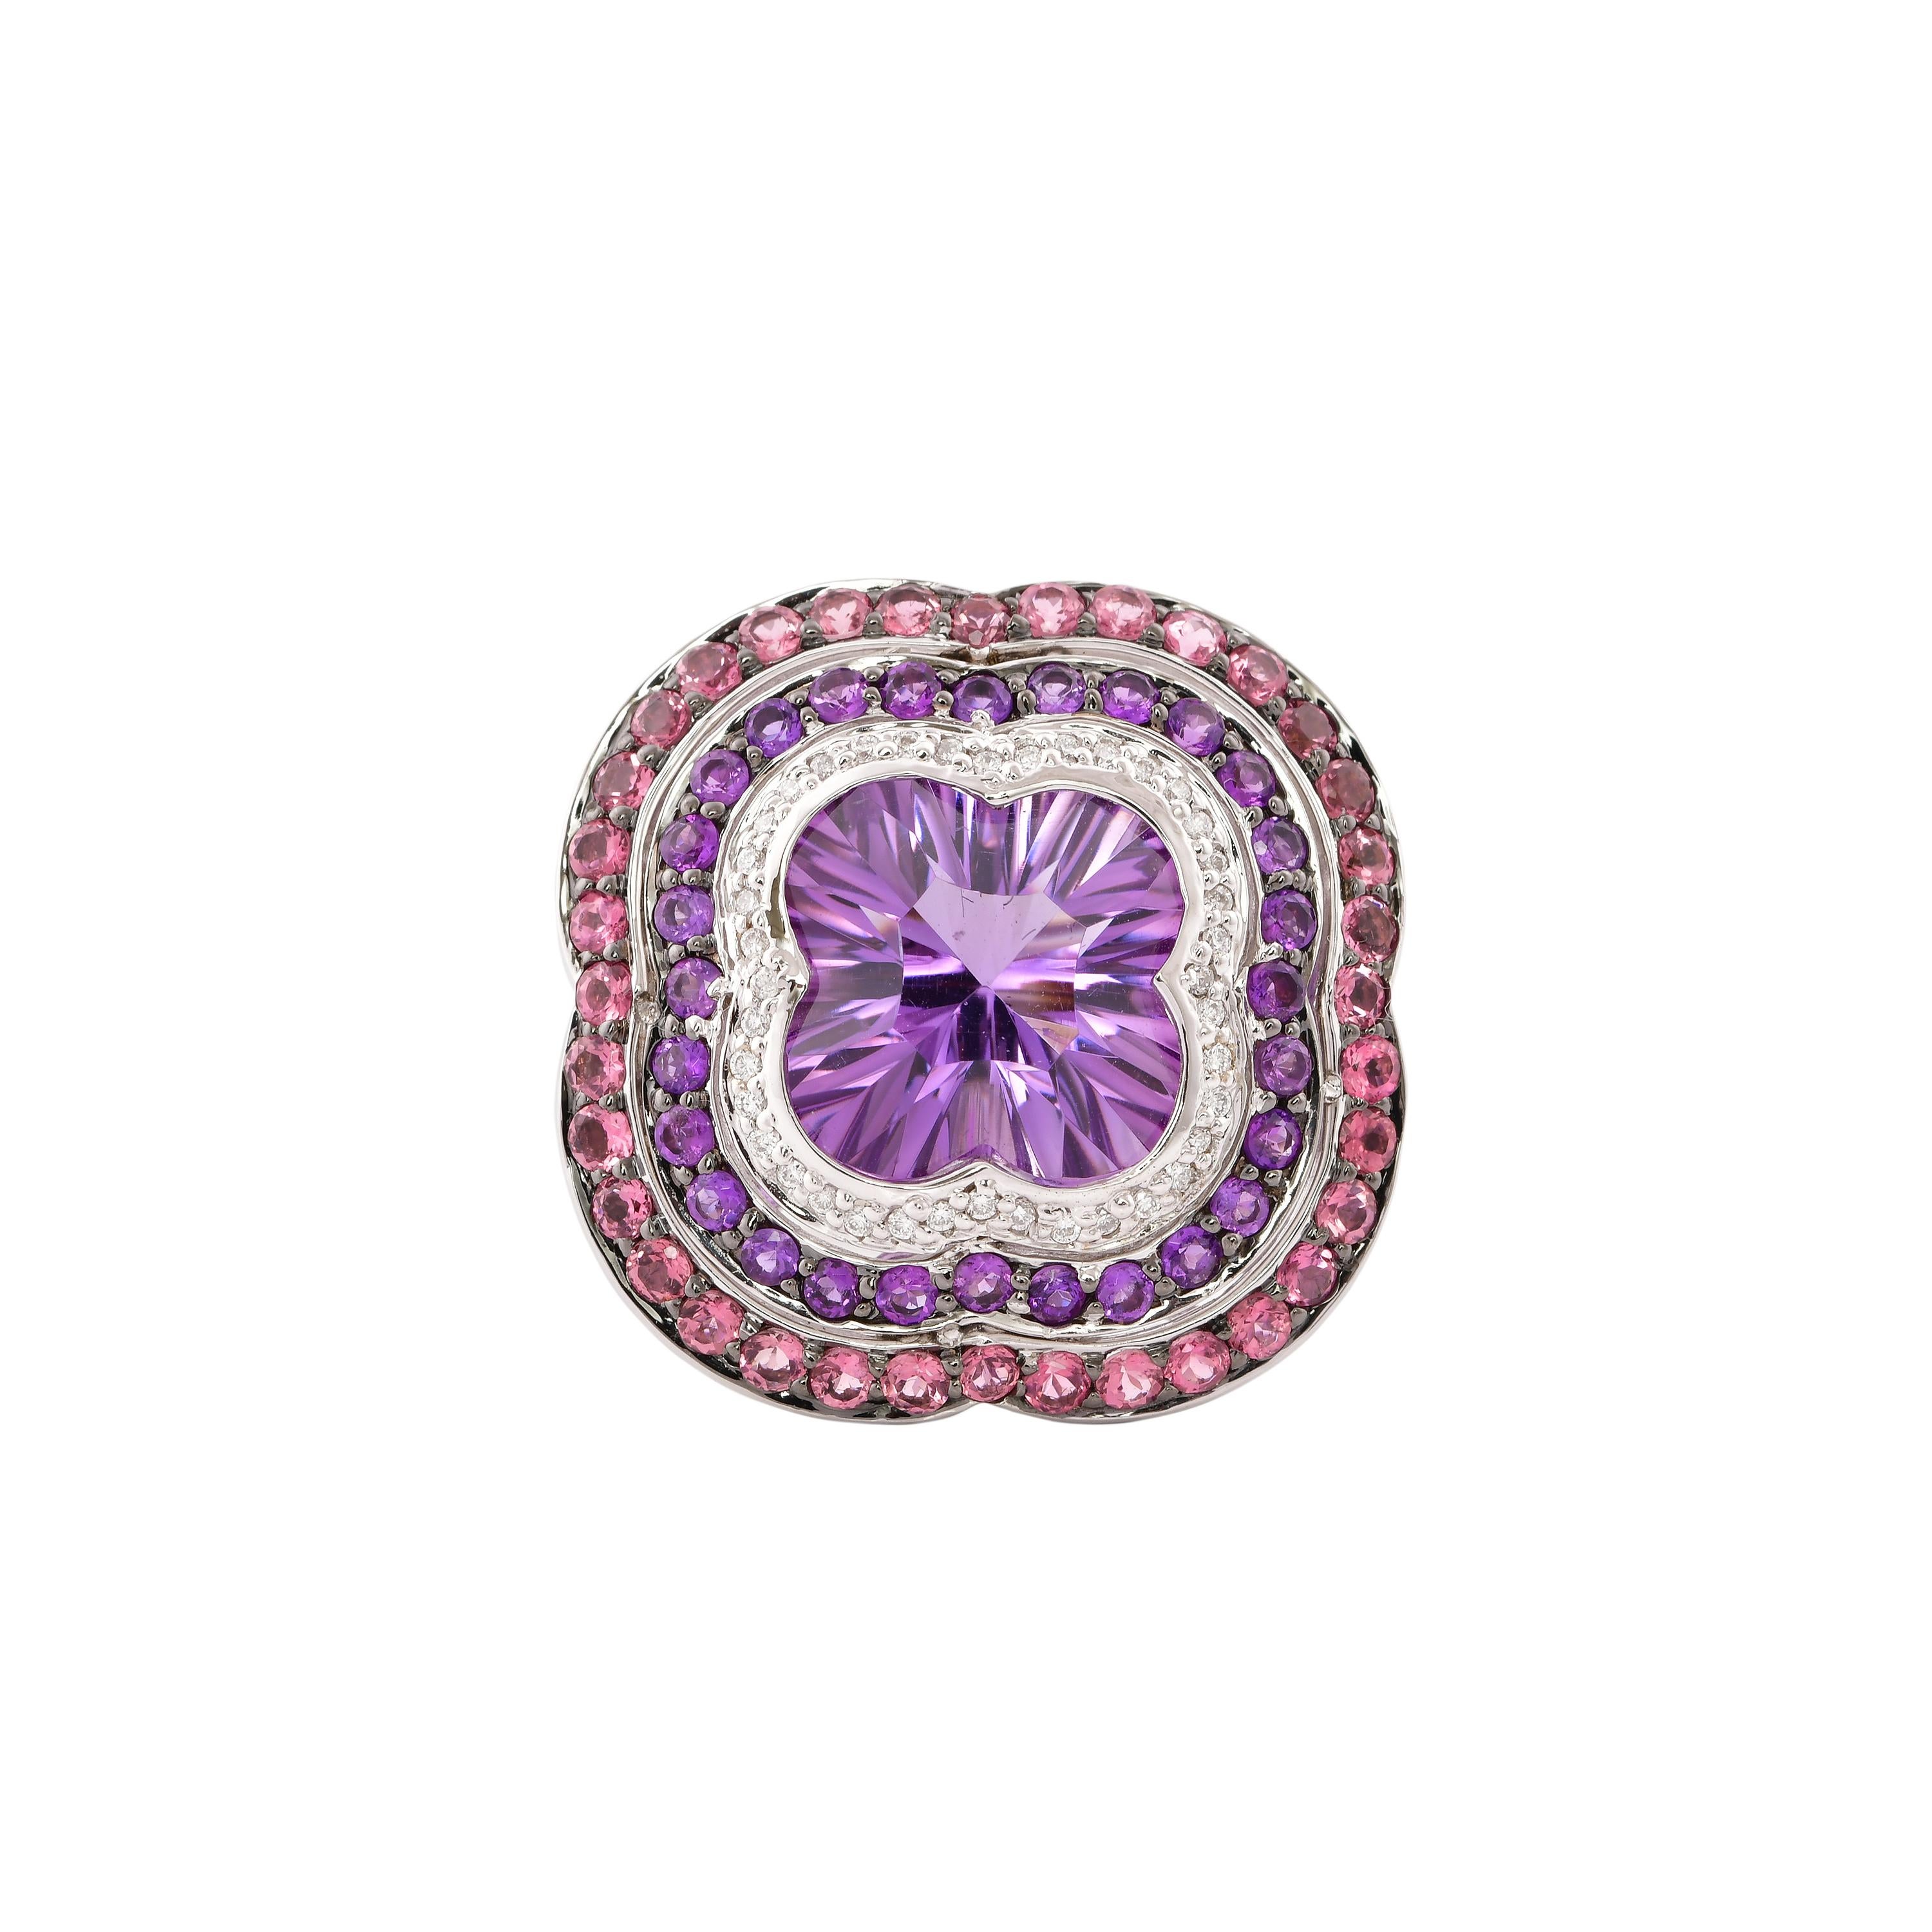 Mixed Cut 6.2 Carat Amethyst, Pink Tourmaline and Diamond Ring in 14 Karat White Gold For Sale